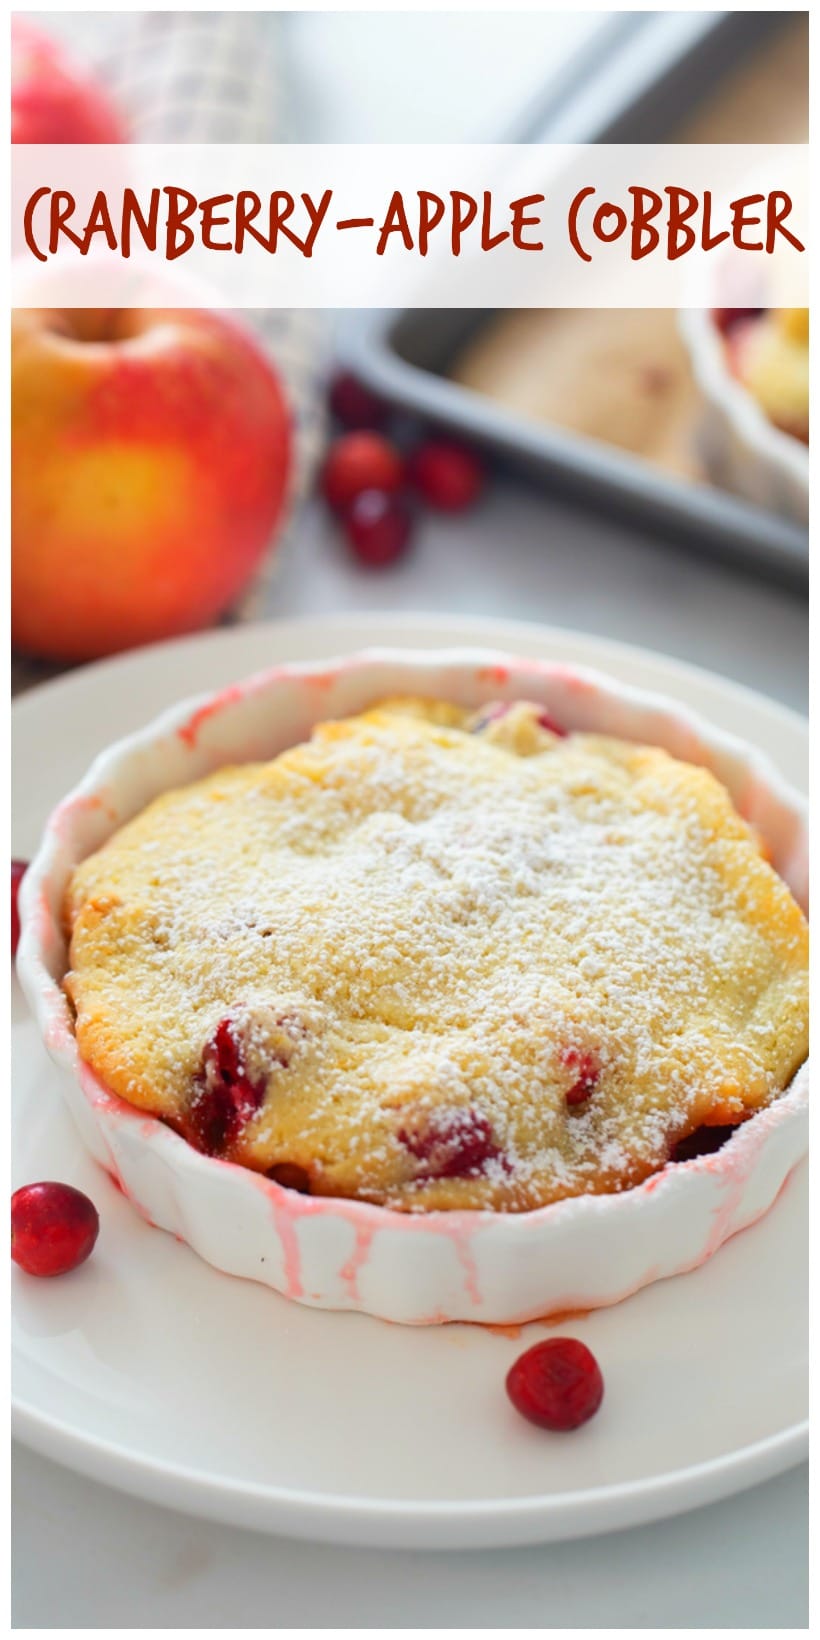 Cranberry-Apple Cobbler takes full advantage of in season, fall fruit. Sweet apples and tart cranberries make a layer of undeniably juicy and festive looking fruit. However, it's the buttery topping that puts it all over the top! via @cmpollak1